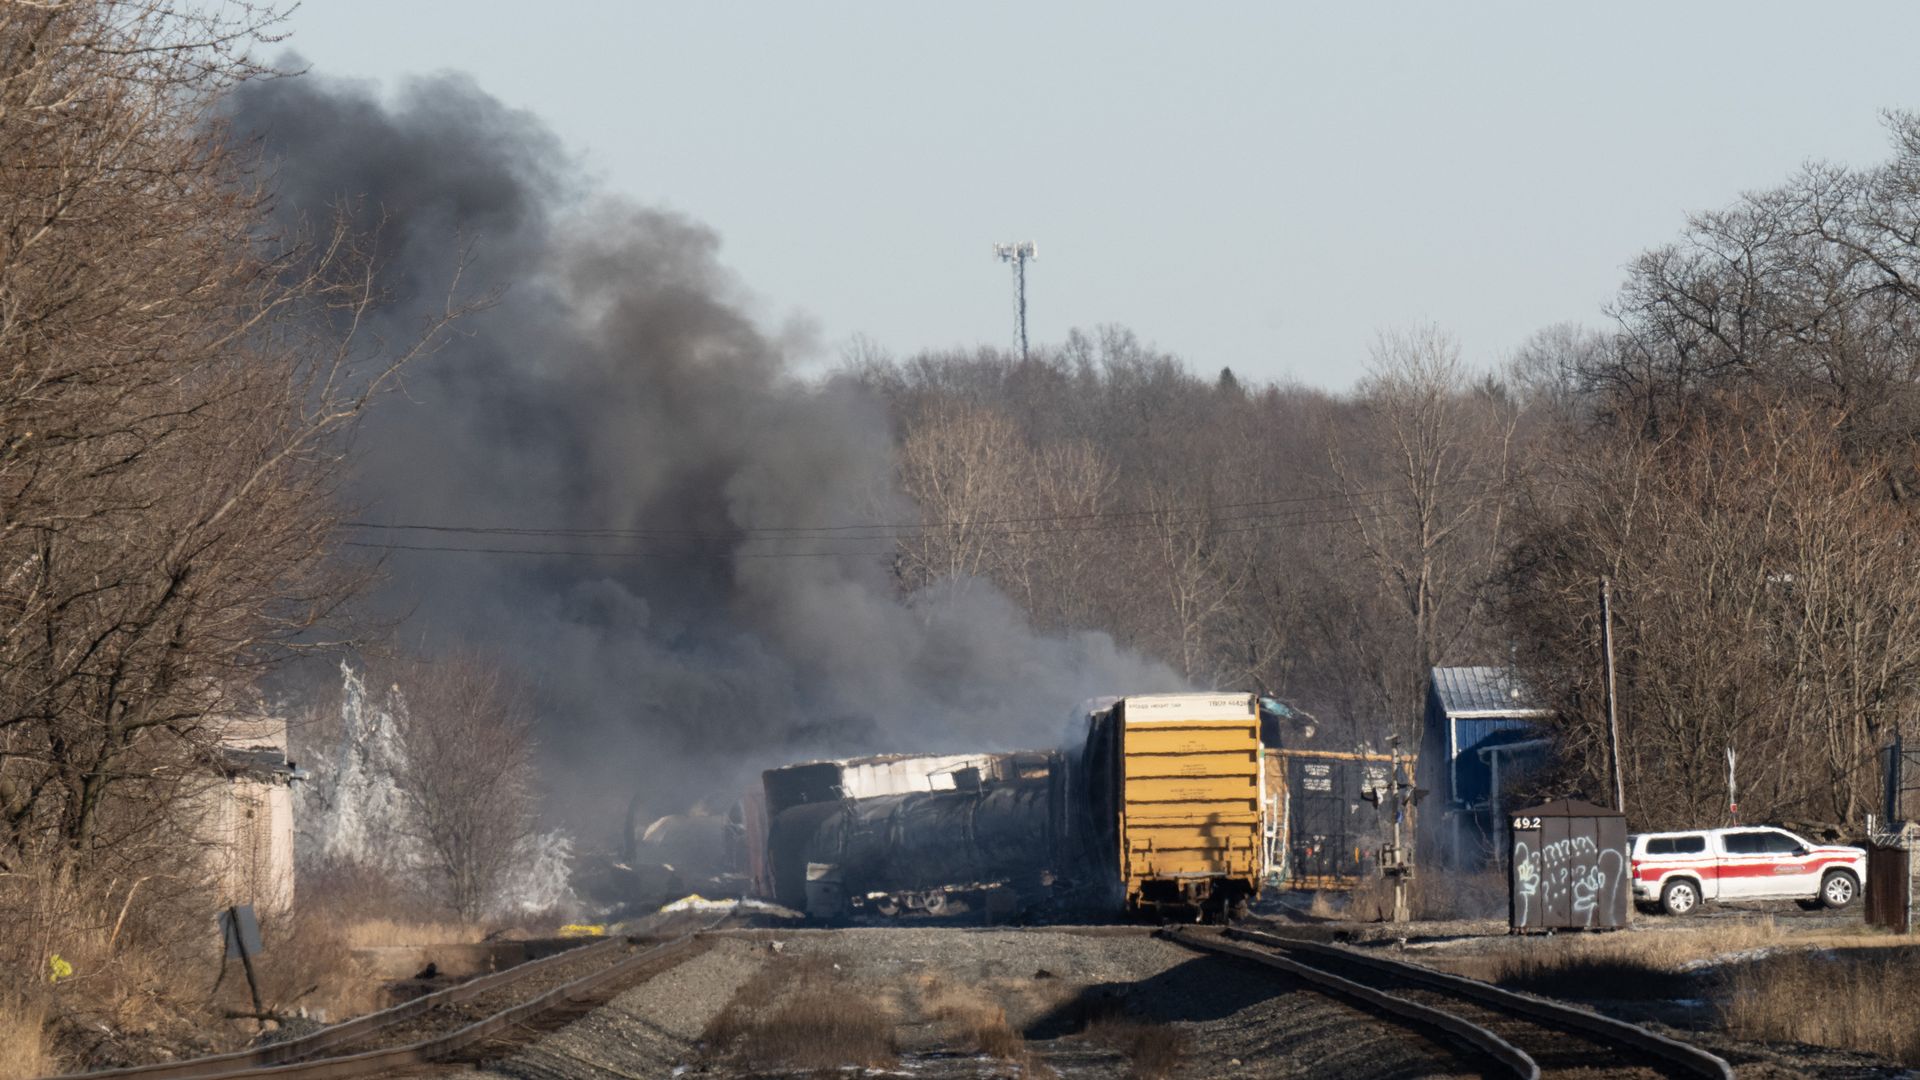 Smoke rises from a derailed cargo train in East Palestine, Ohio, on February 4